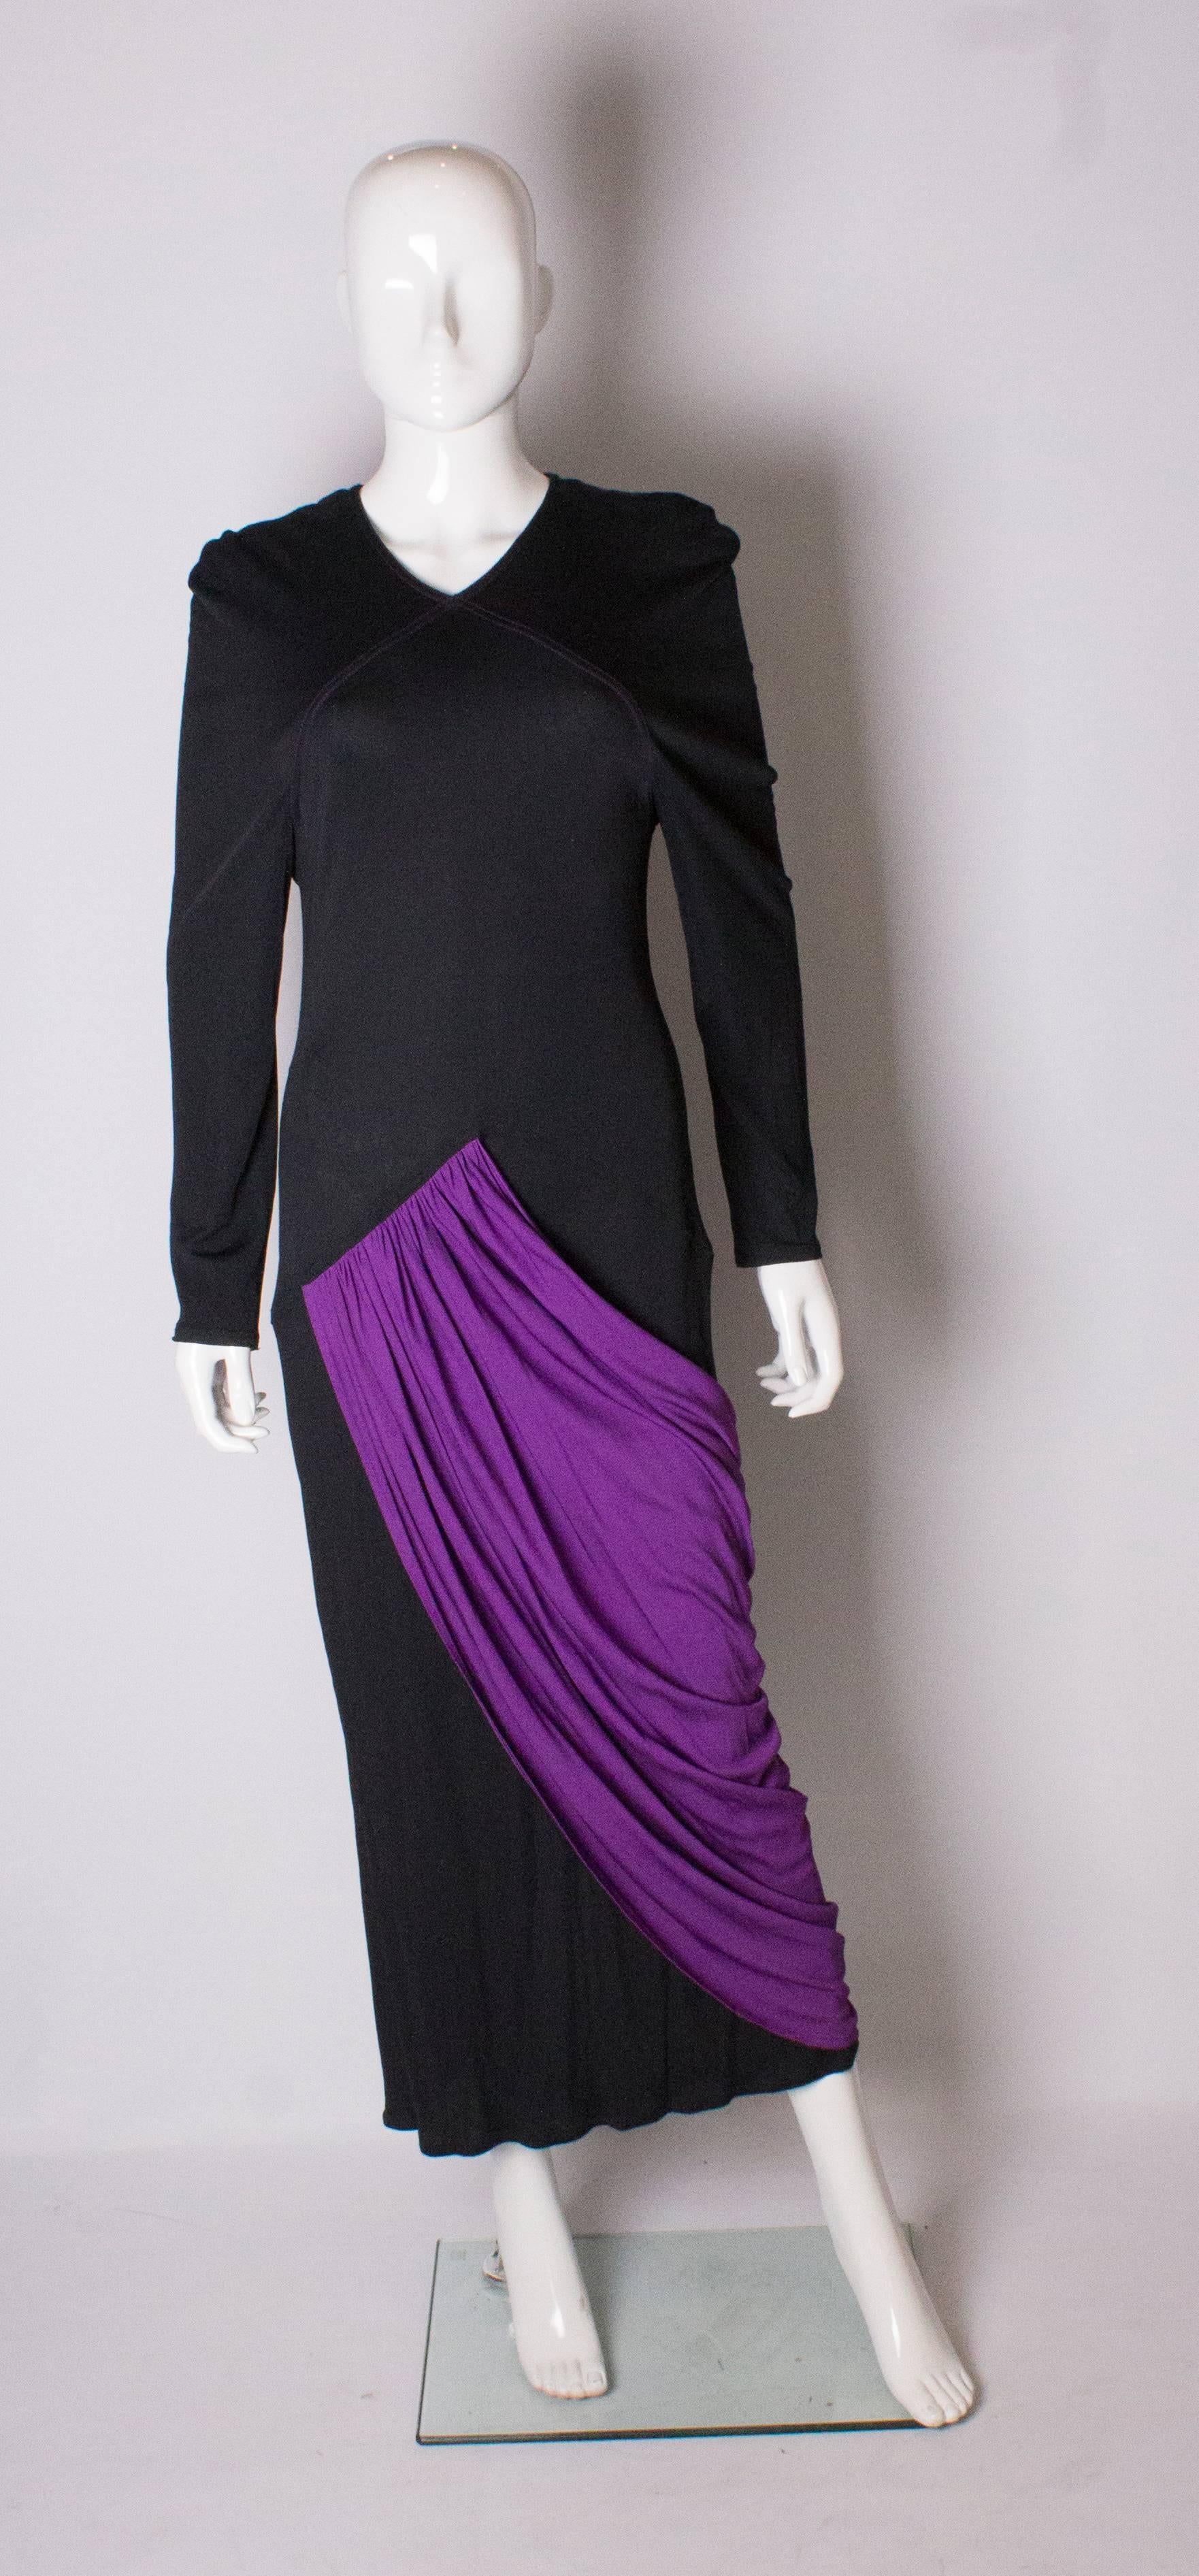  A great vintage  gown in black and purple by Bruce Oldfield. The dress has a v neckline with a purple pleated over skirt.- front and back. The dress has a 14 1/2 